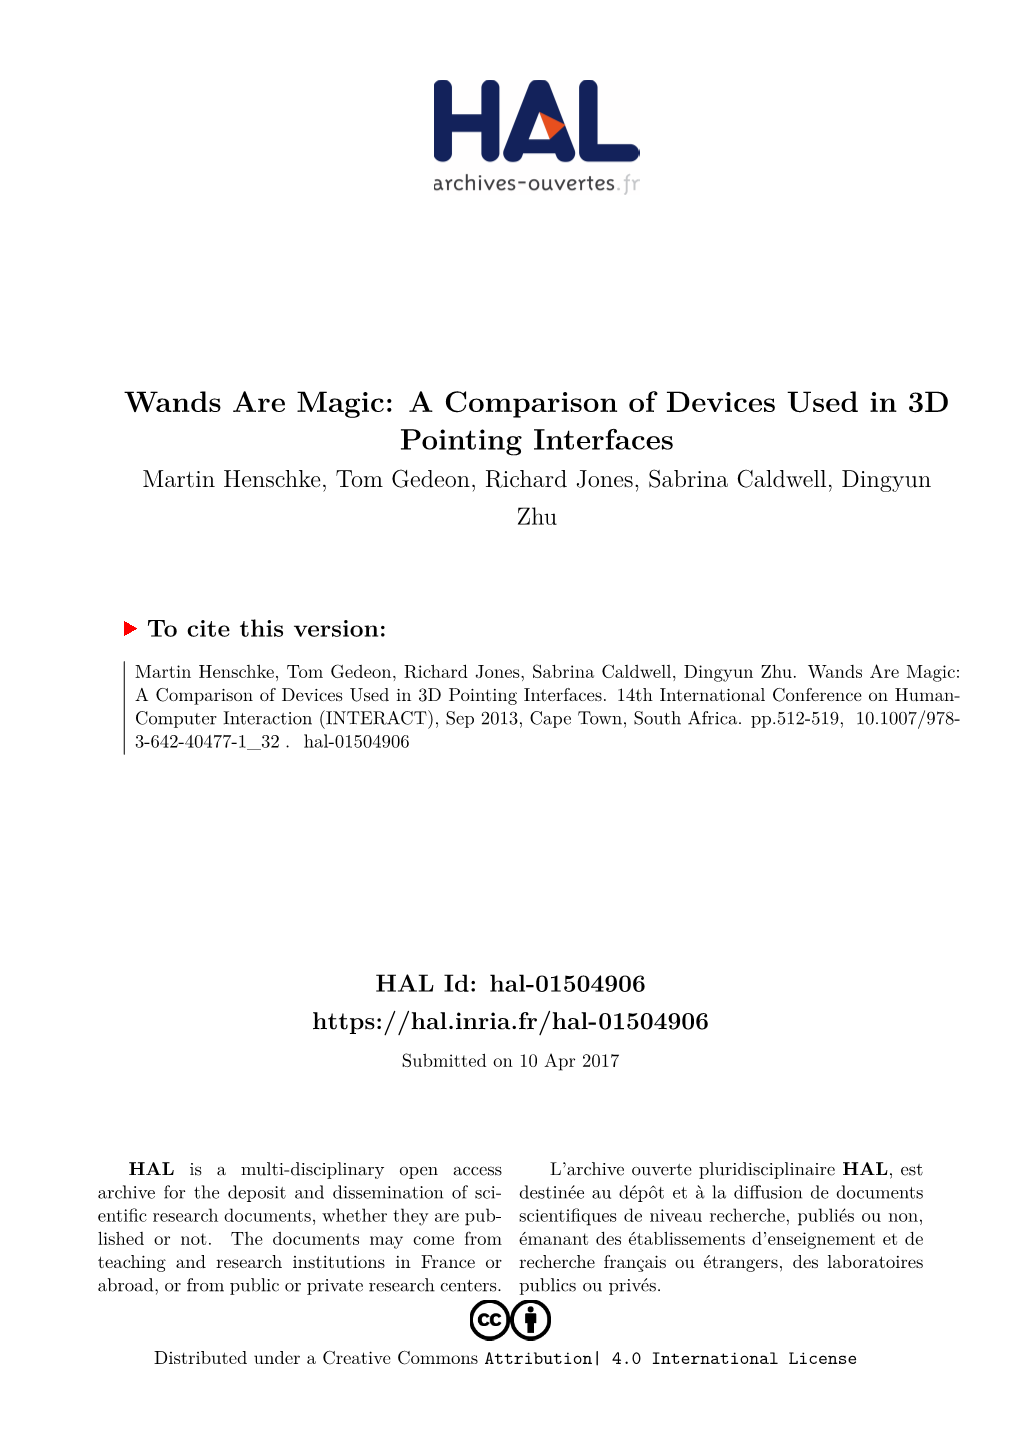 Wands Are Magic: a Comparison of Devices Used in 3D Pointing Interfaces Martin Henschke, Tom Gedeon, Richard Jones, Sabrina Caldwell, Dingyun Zhu